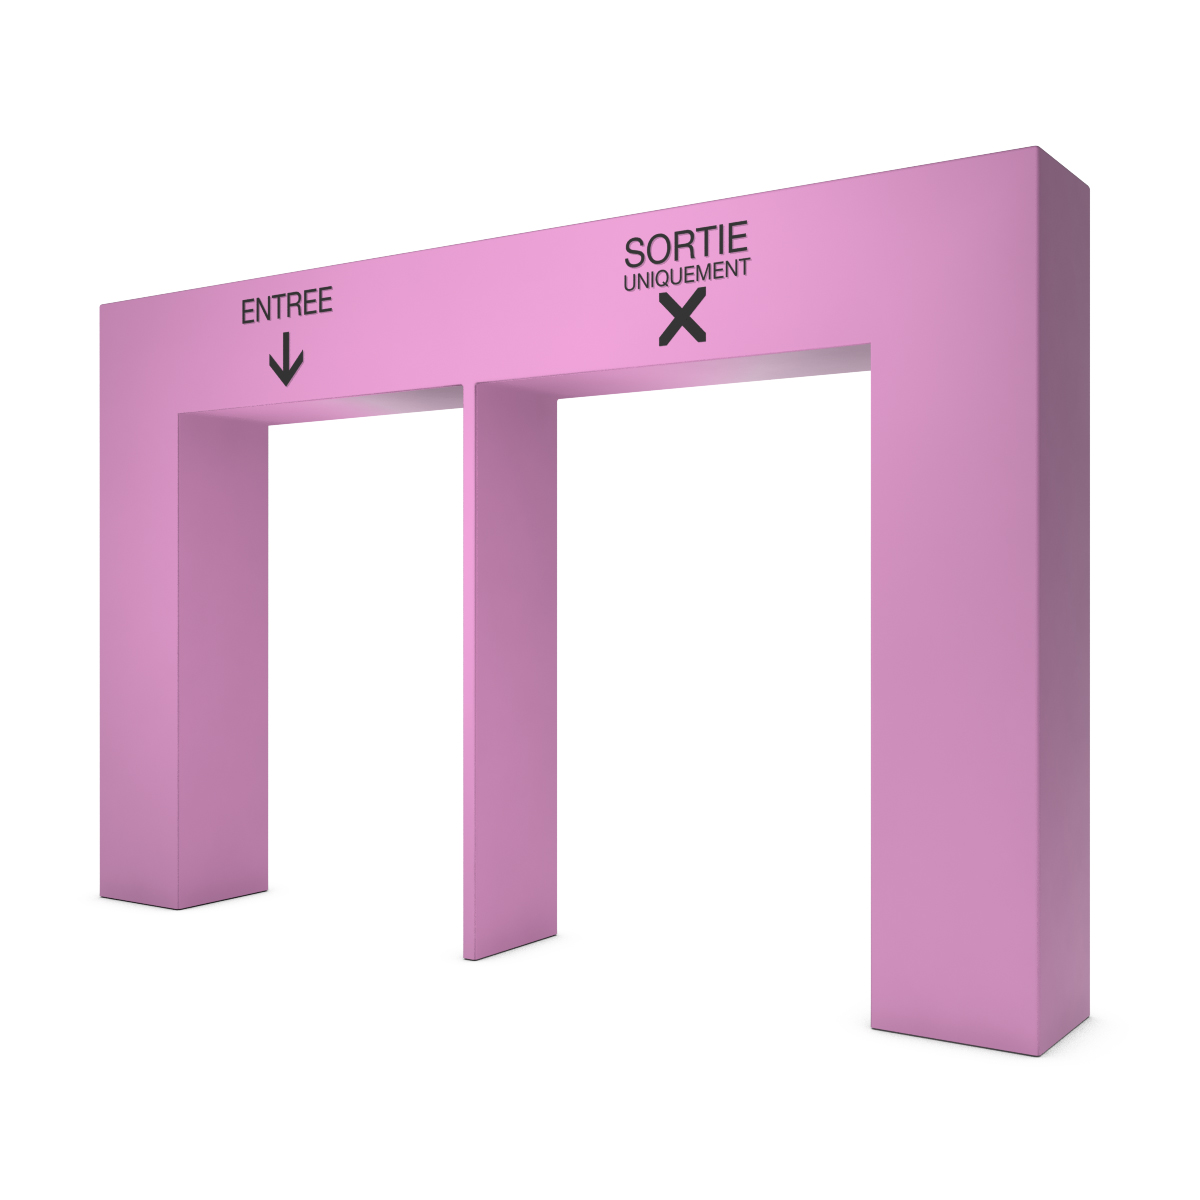 Double arch covered with solid-color textile - Sugared pink